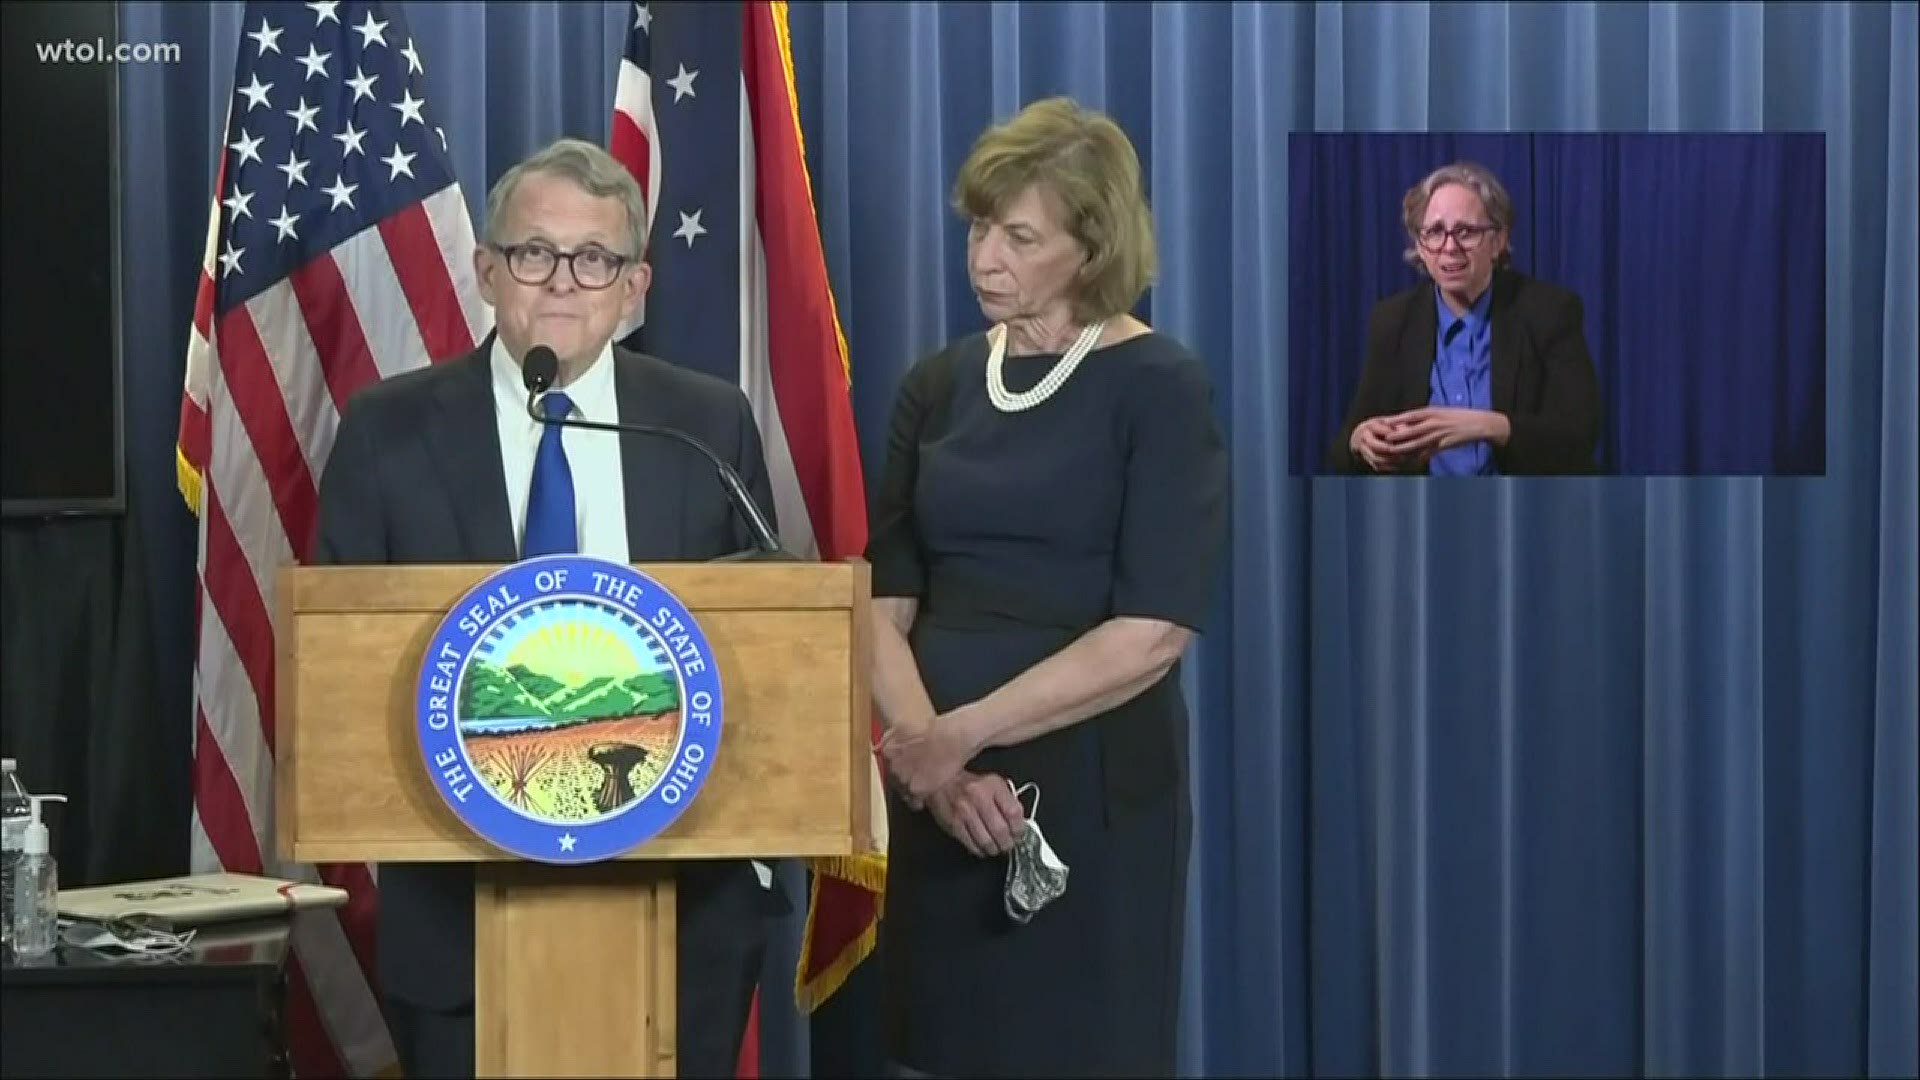 'All of us have an obligation to speak out against injustice and racism,' the Ohio governor said in a press conference.